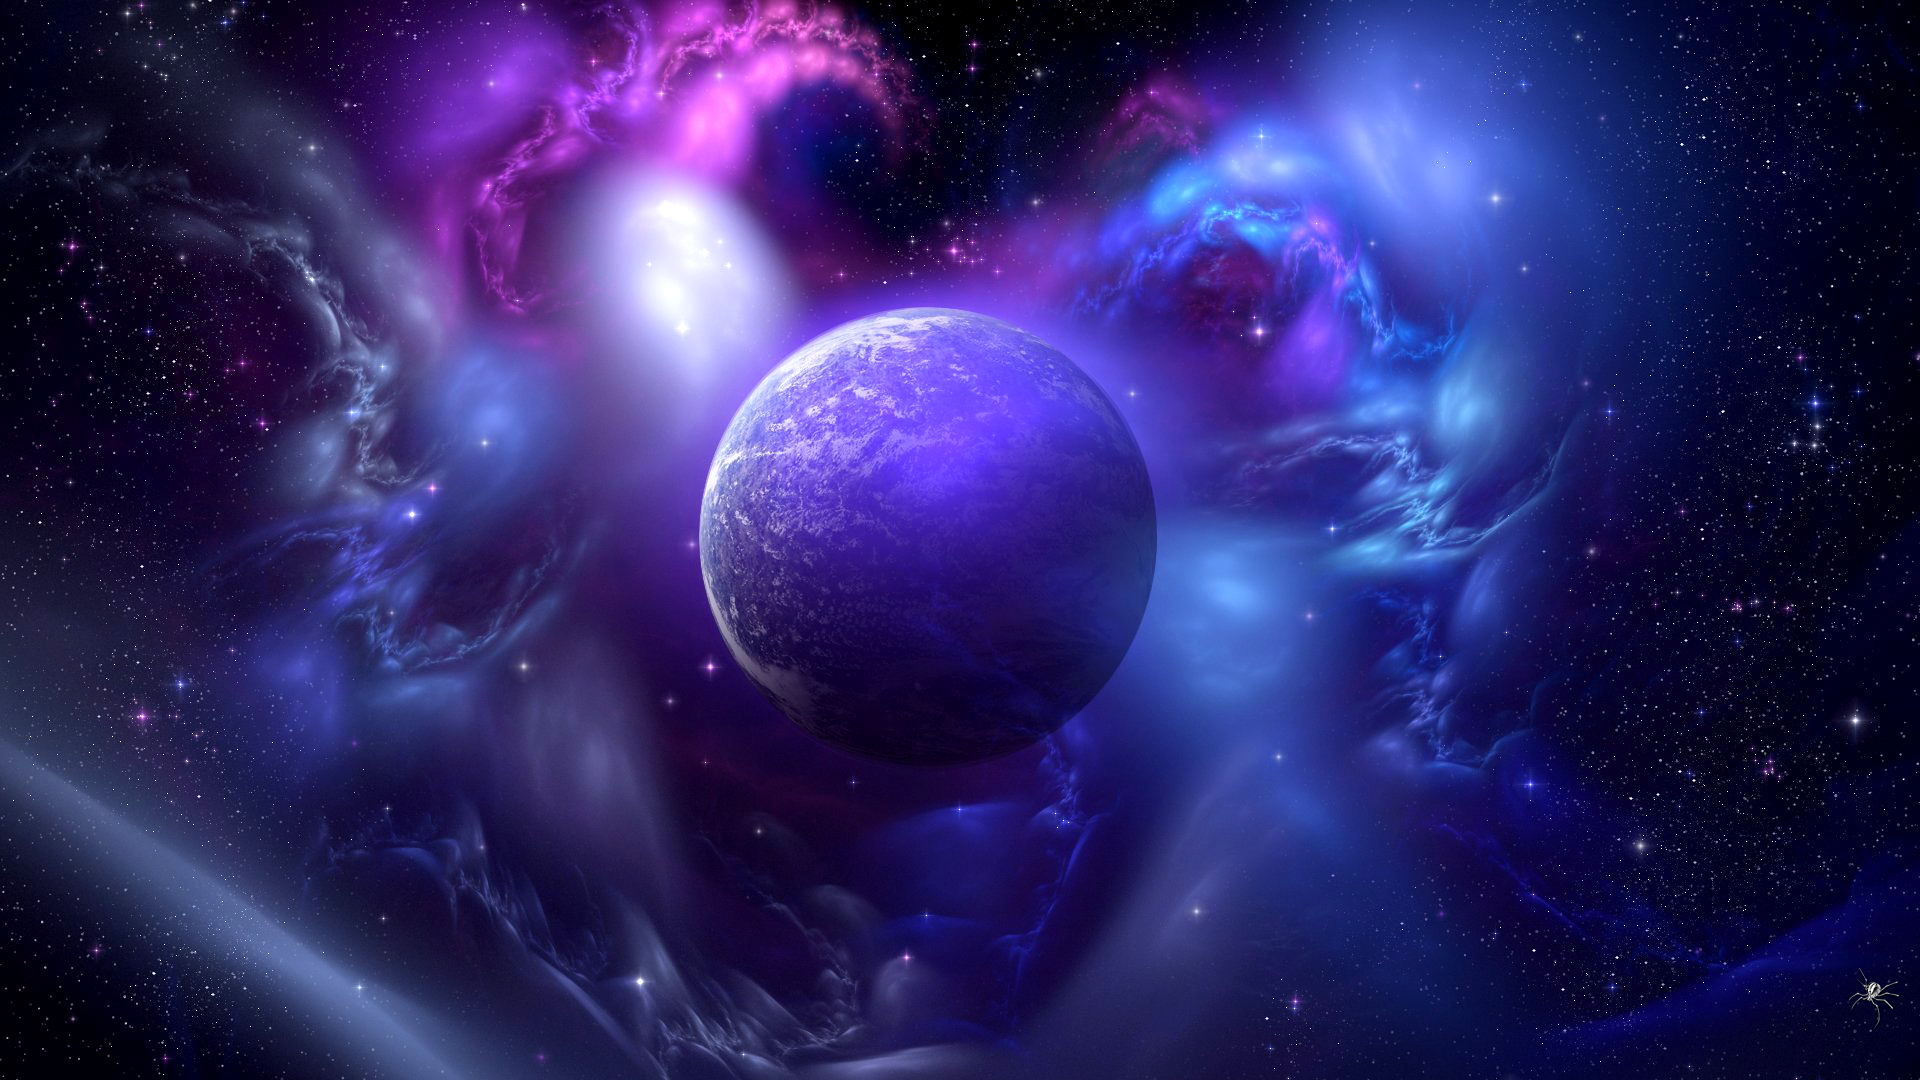 Hd Wallpapers 1080p Space Hd space wallpaper 1920x1080